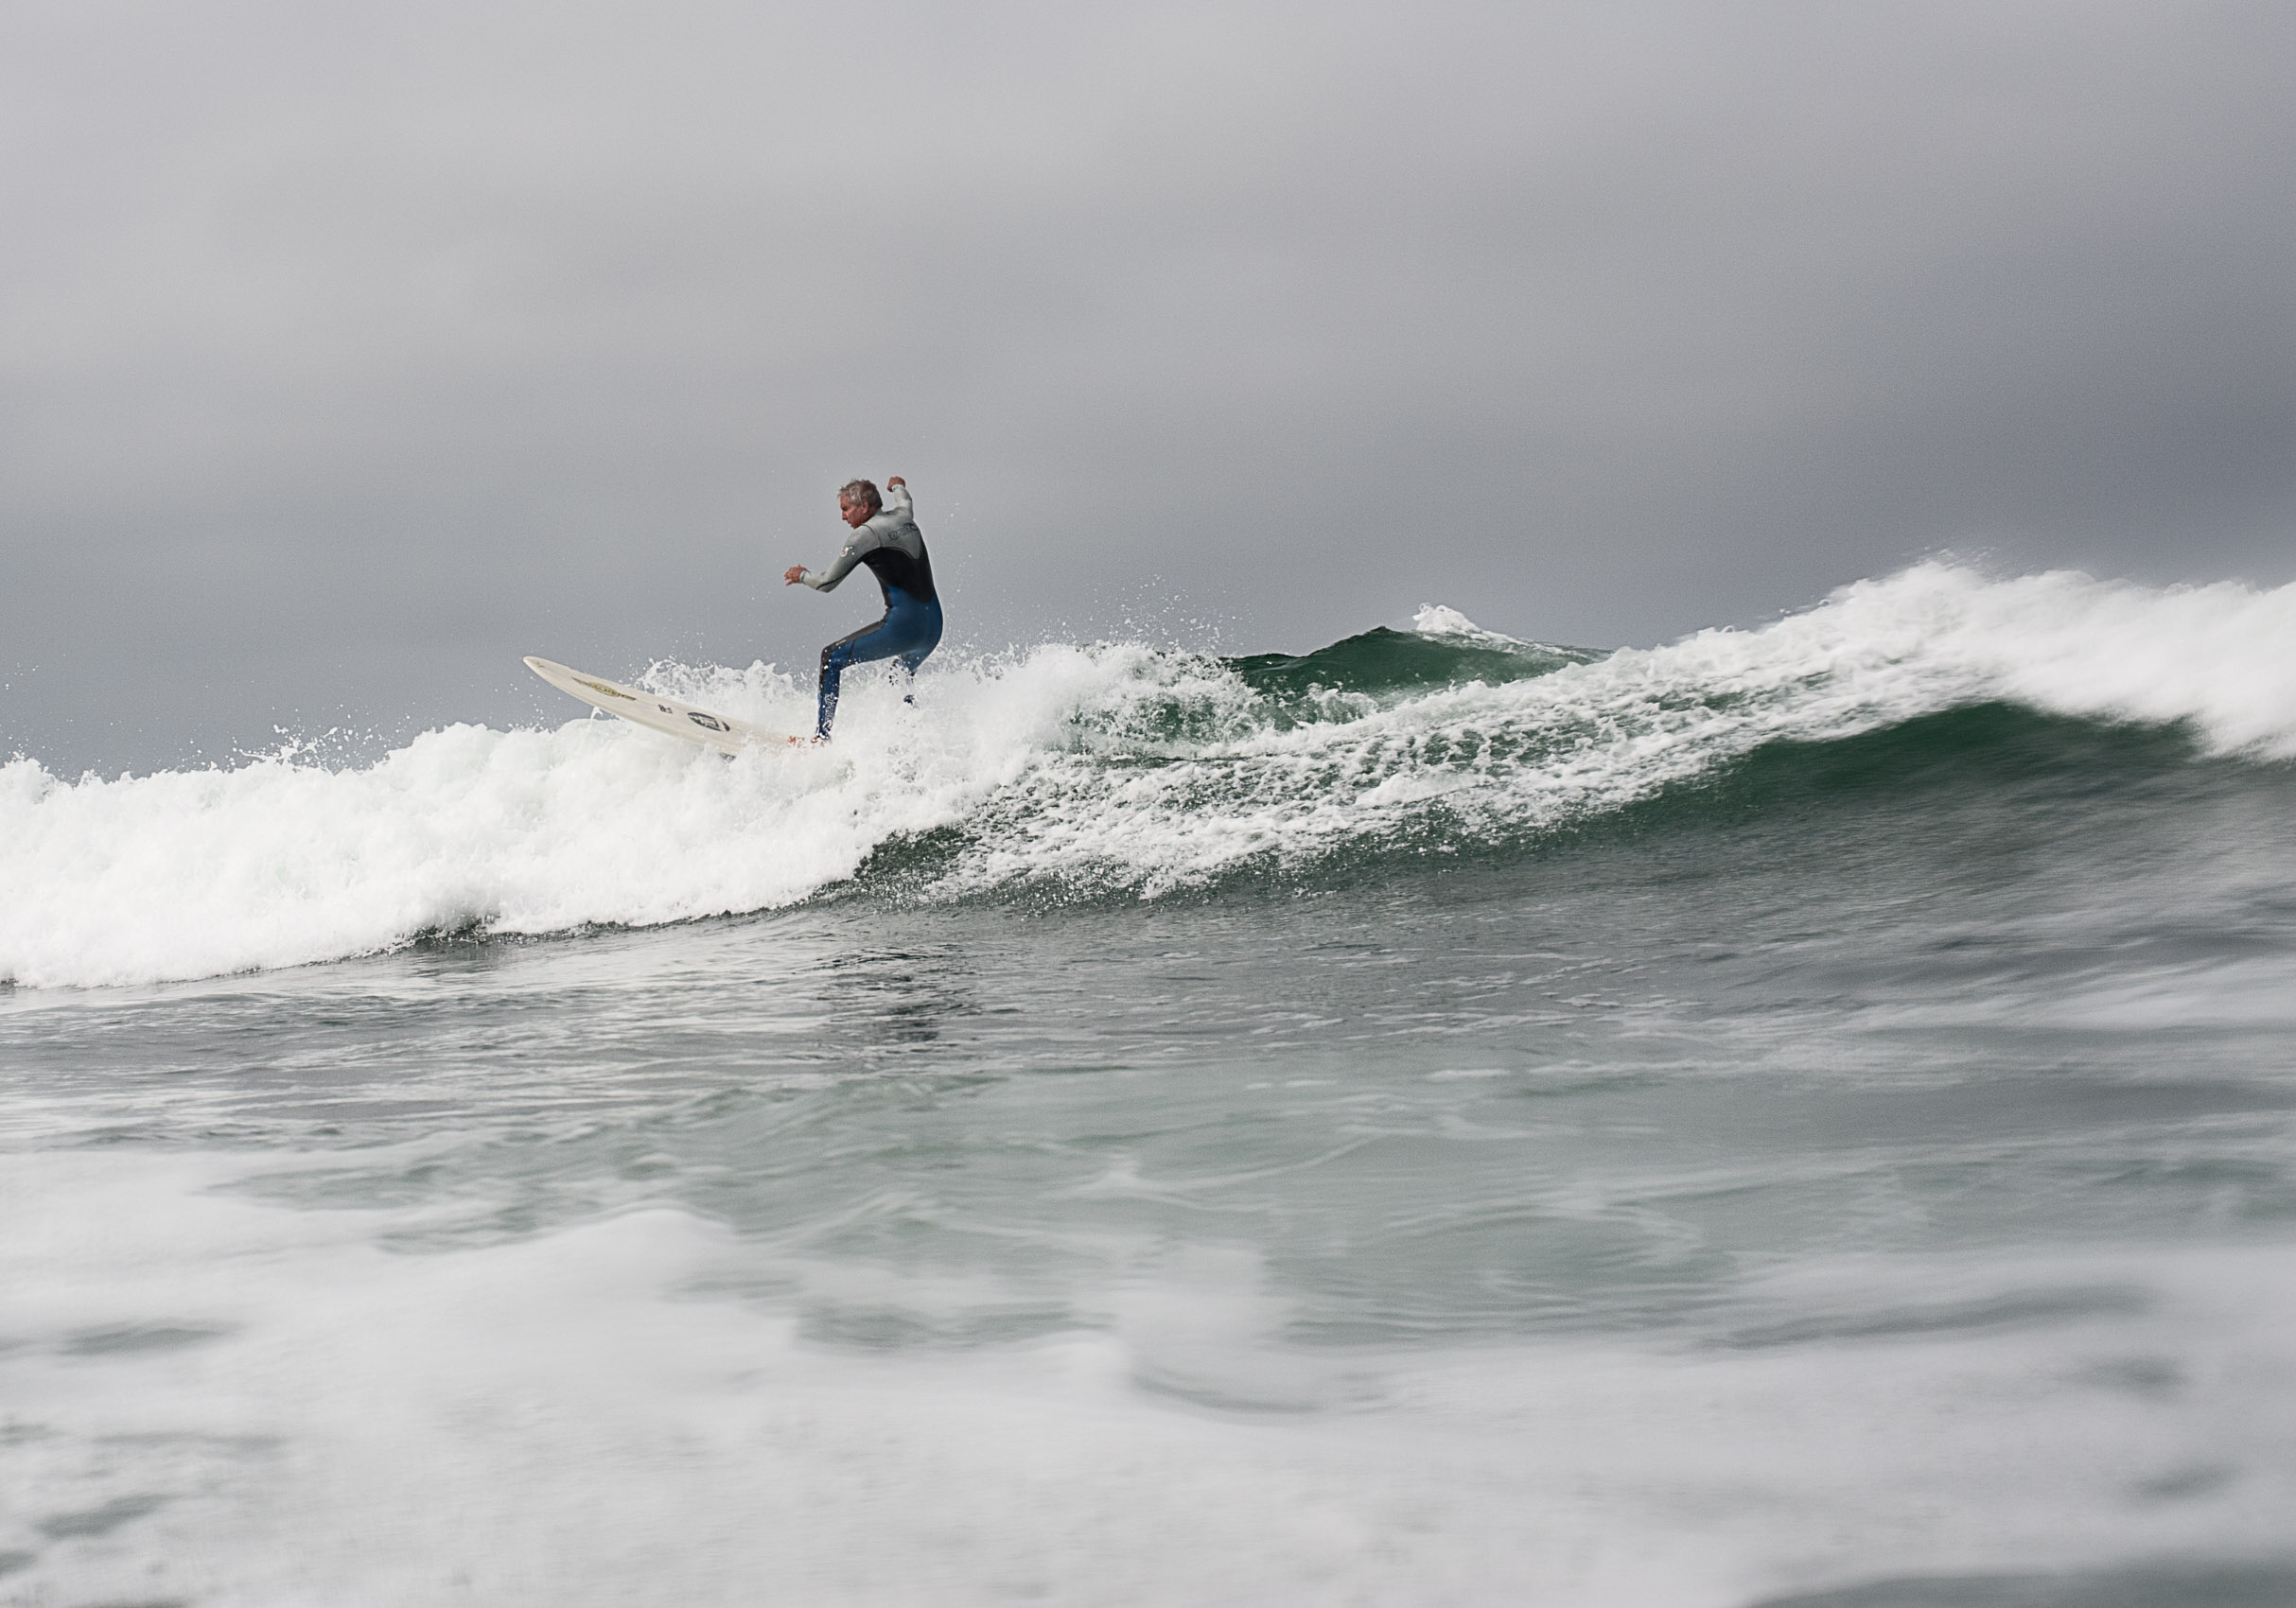 An older surfer catches a wave in choppy waters at San Onofre State Beach, California.